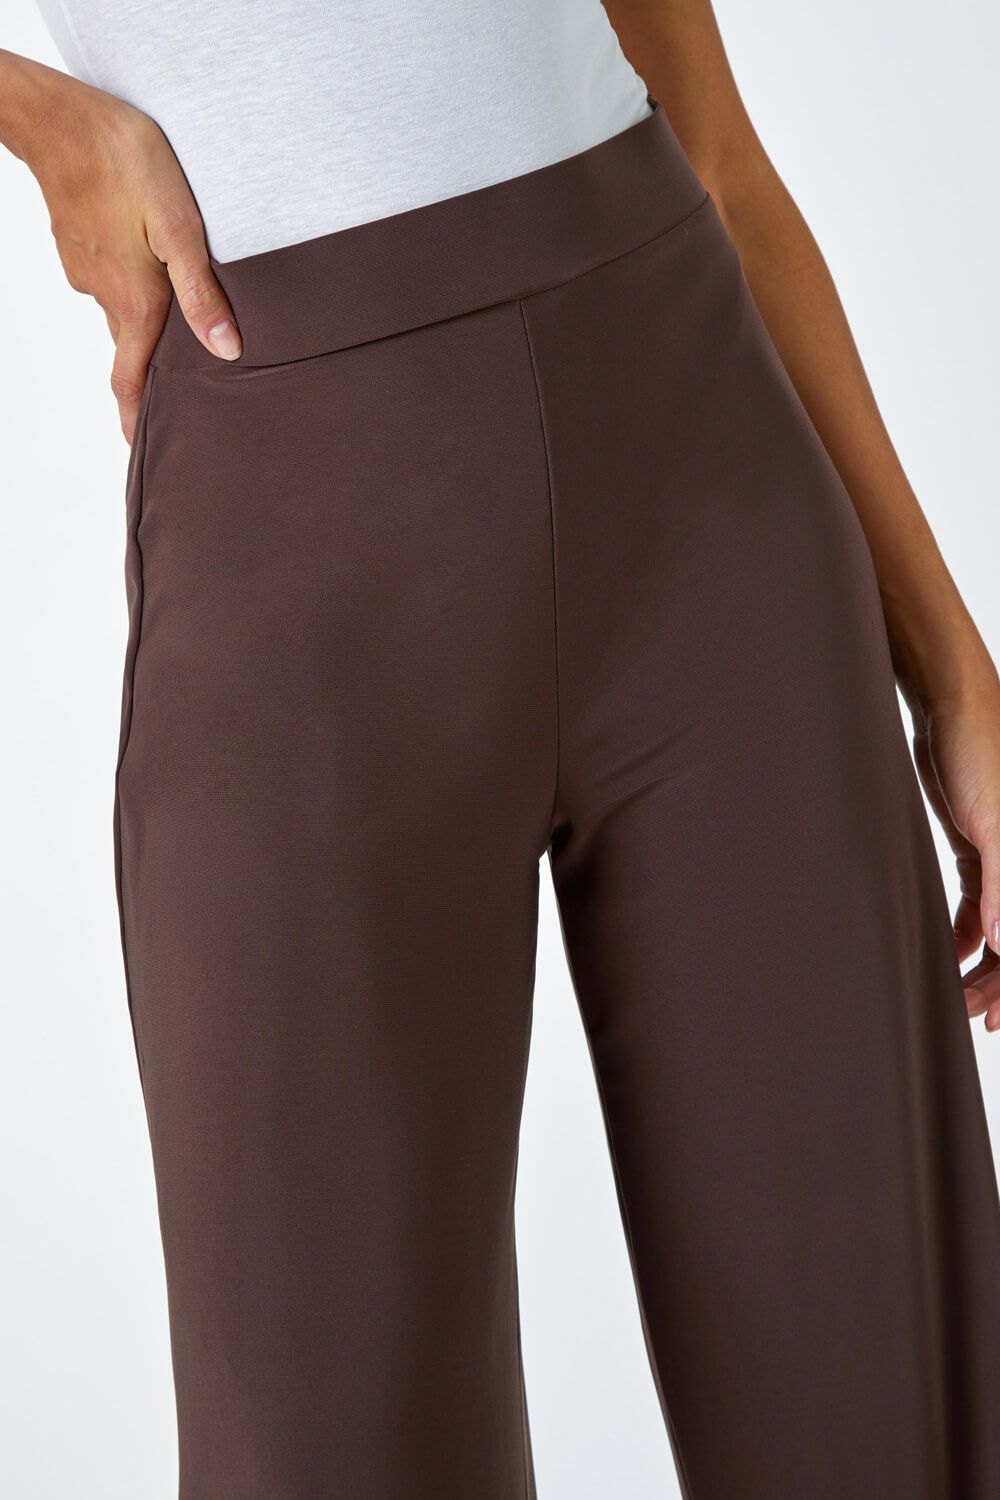 Chocolate Wide Leg Stretch Trousers, Image 5 of 5